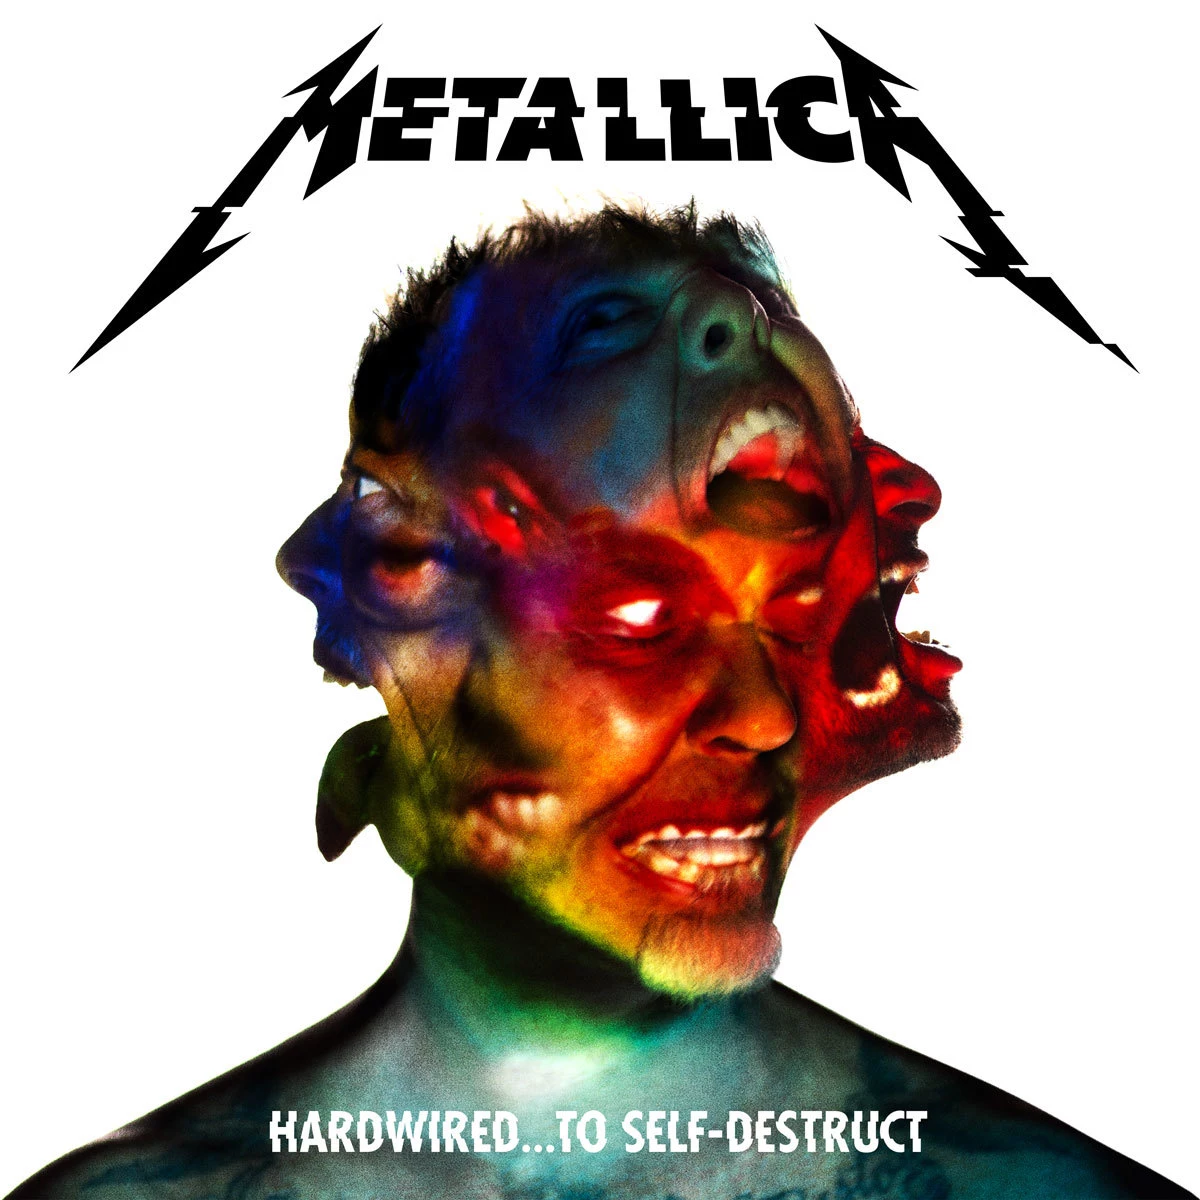 Metallica's “Hardwired” One Week Later